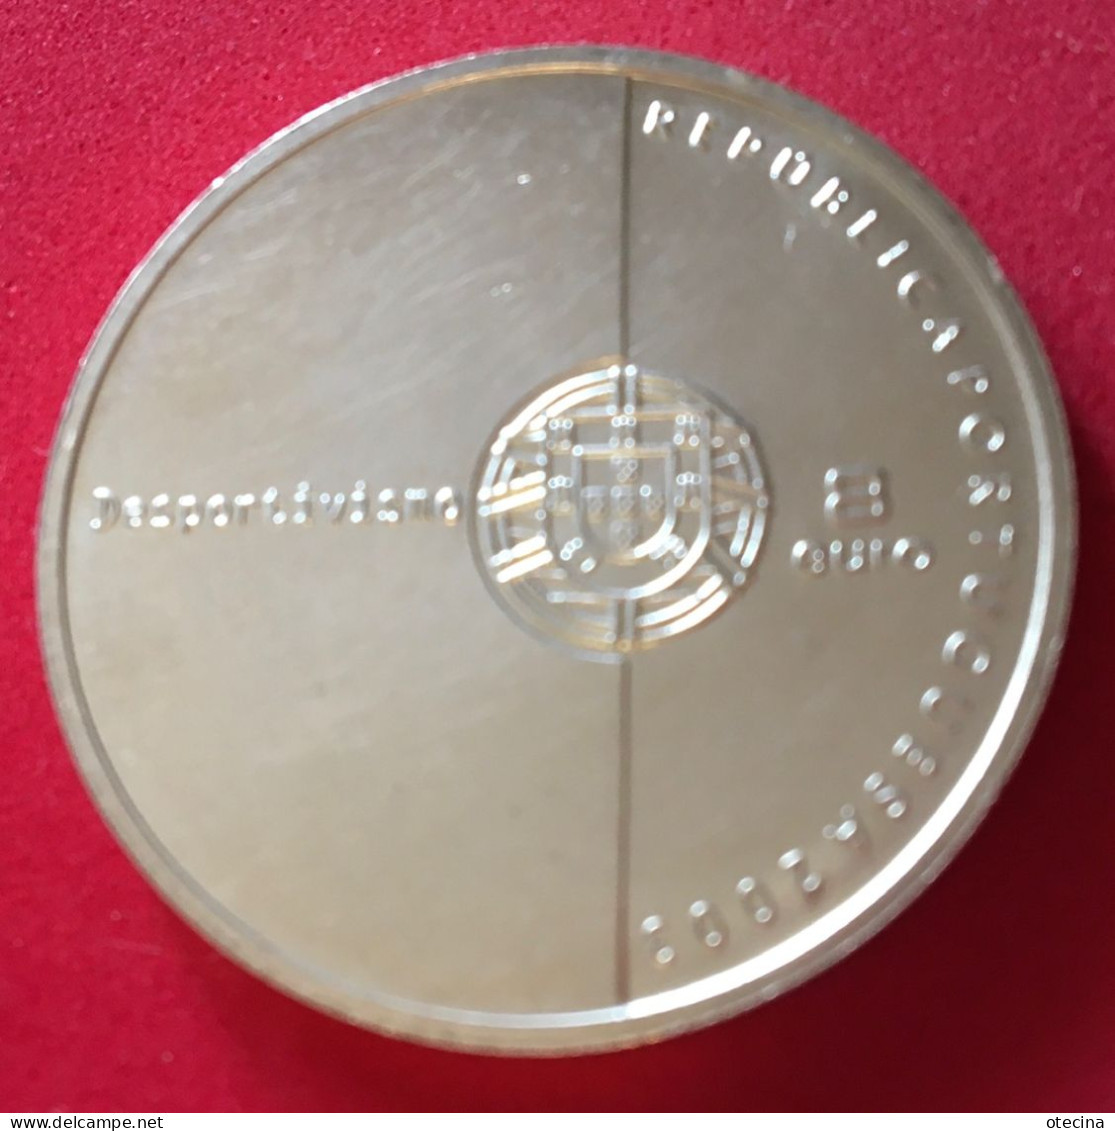 PORTUGAL 8 Euro "Euro 2004 - Football Is Fairplay" 2003 UNC (argent/silver 500/1000) - Portugal